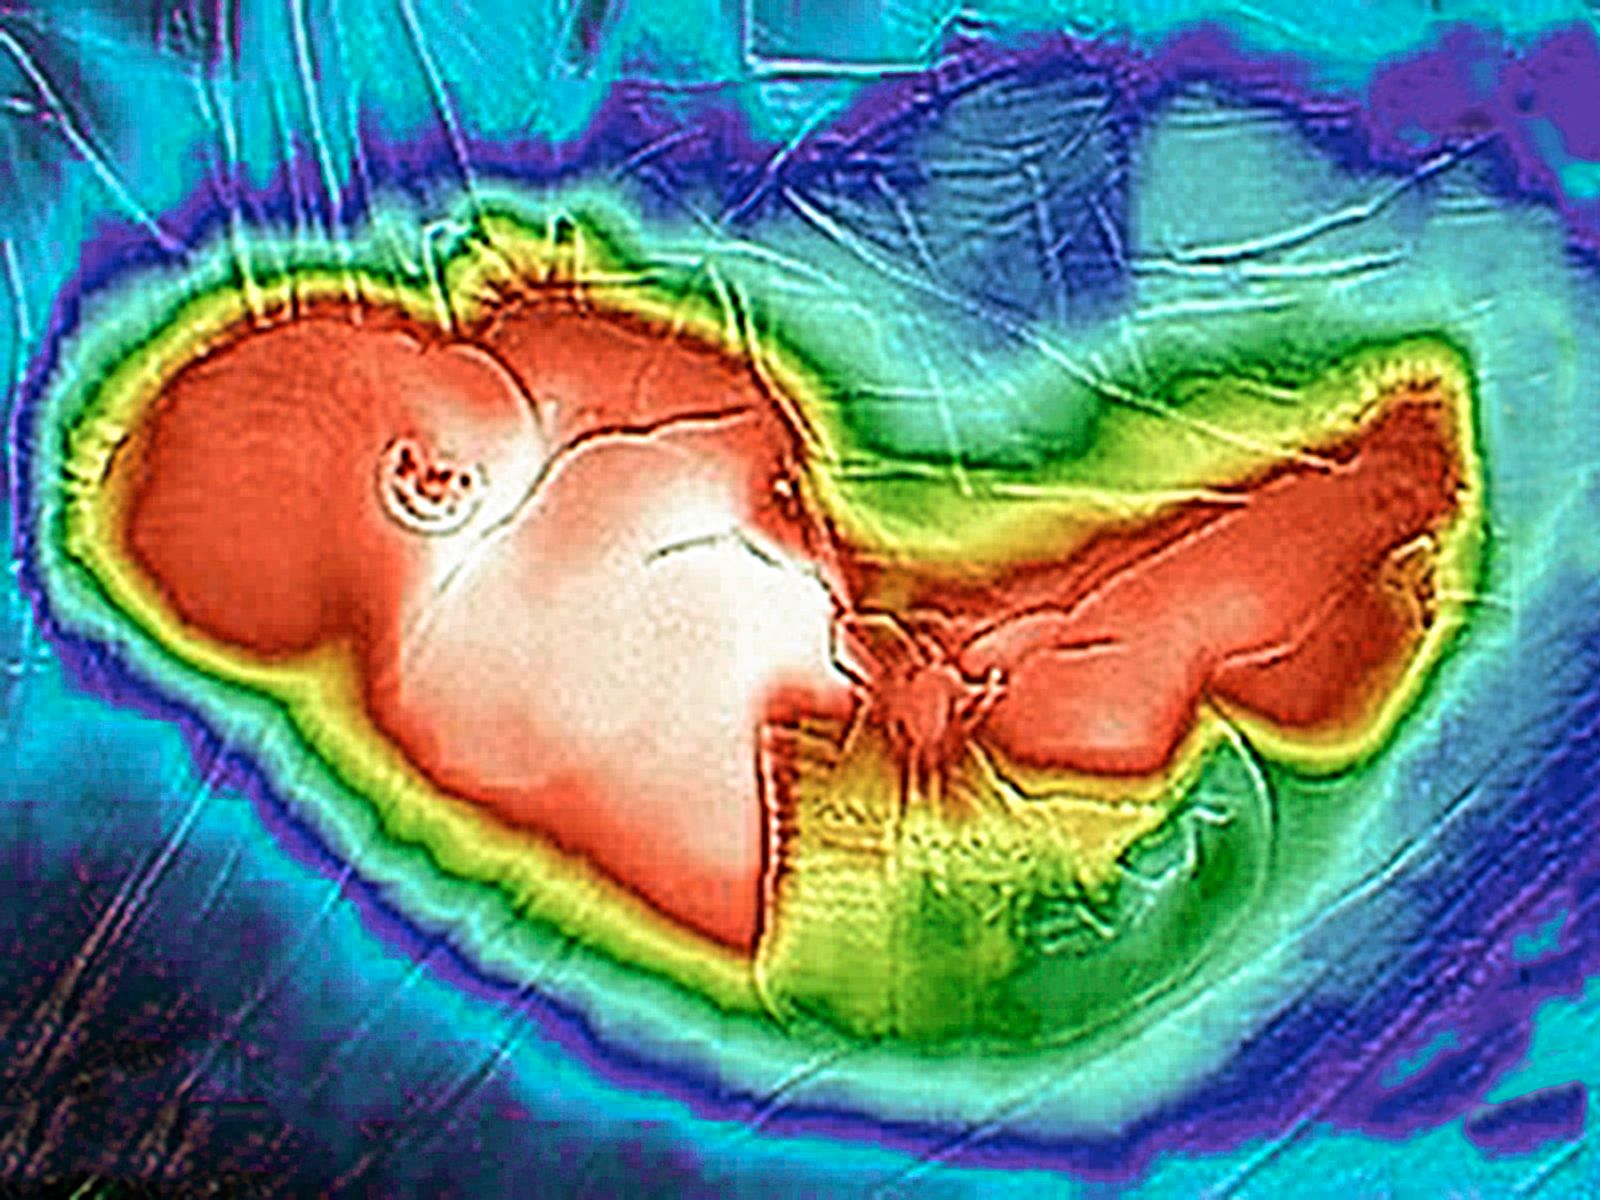 © ROGER GRASAS - Thermographic image of our newborn daughter sleeping